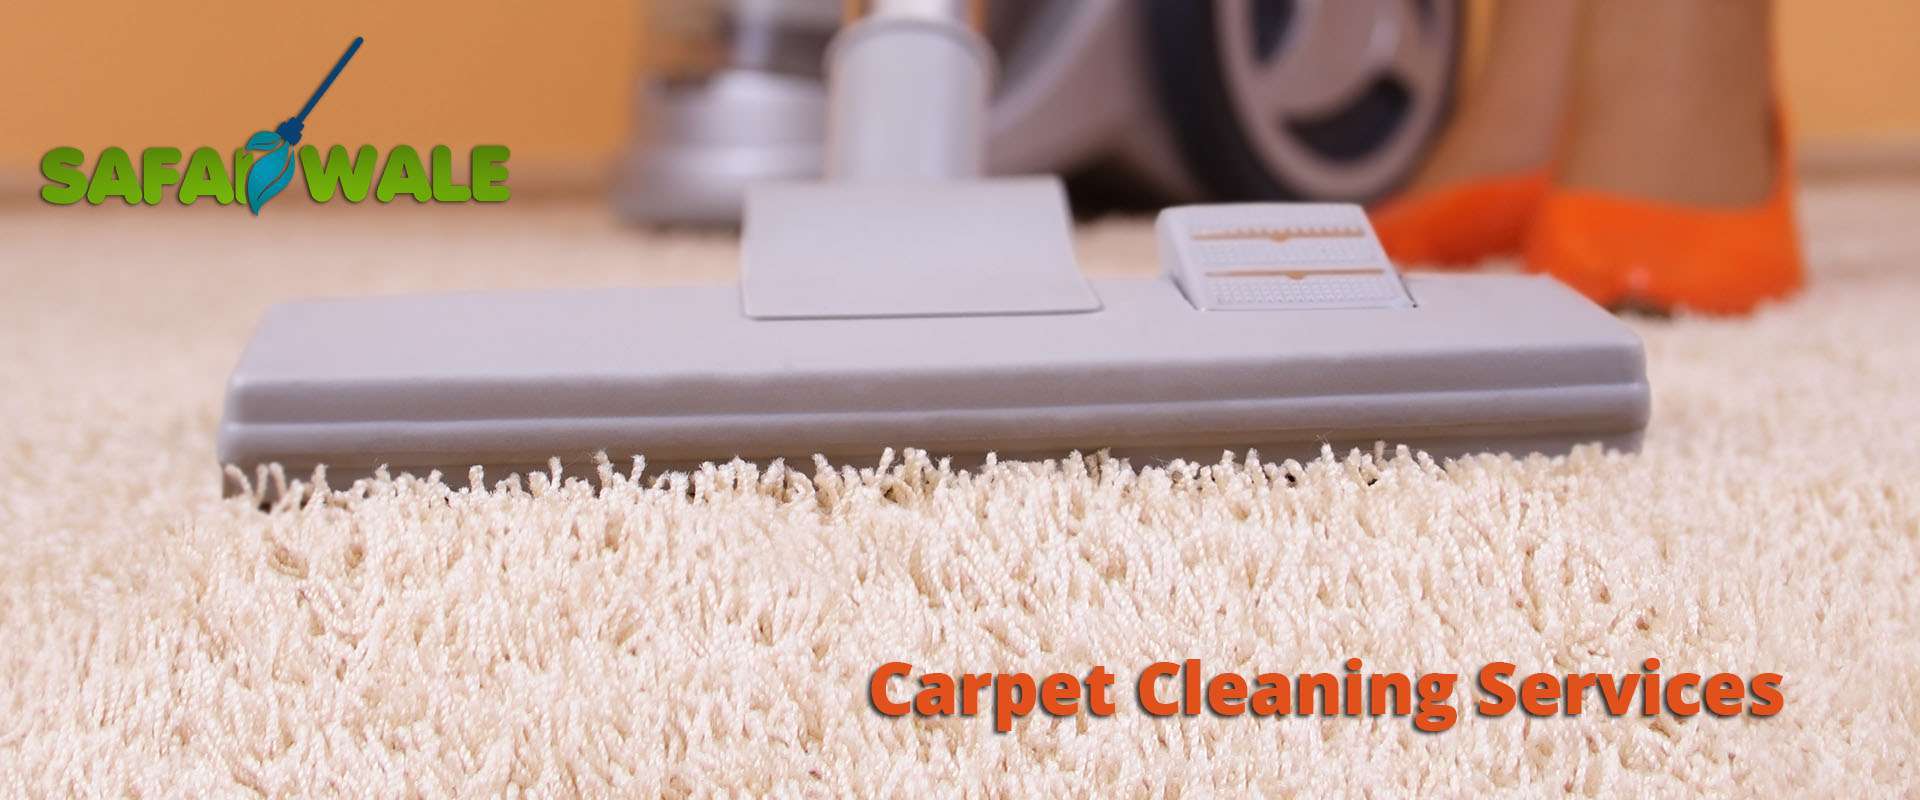 carpet cleaning services in Chennai